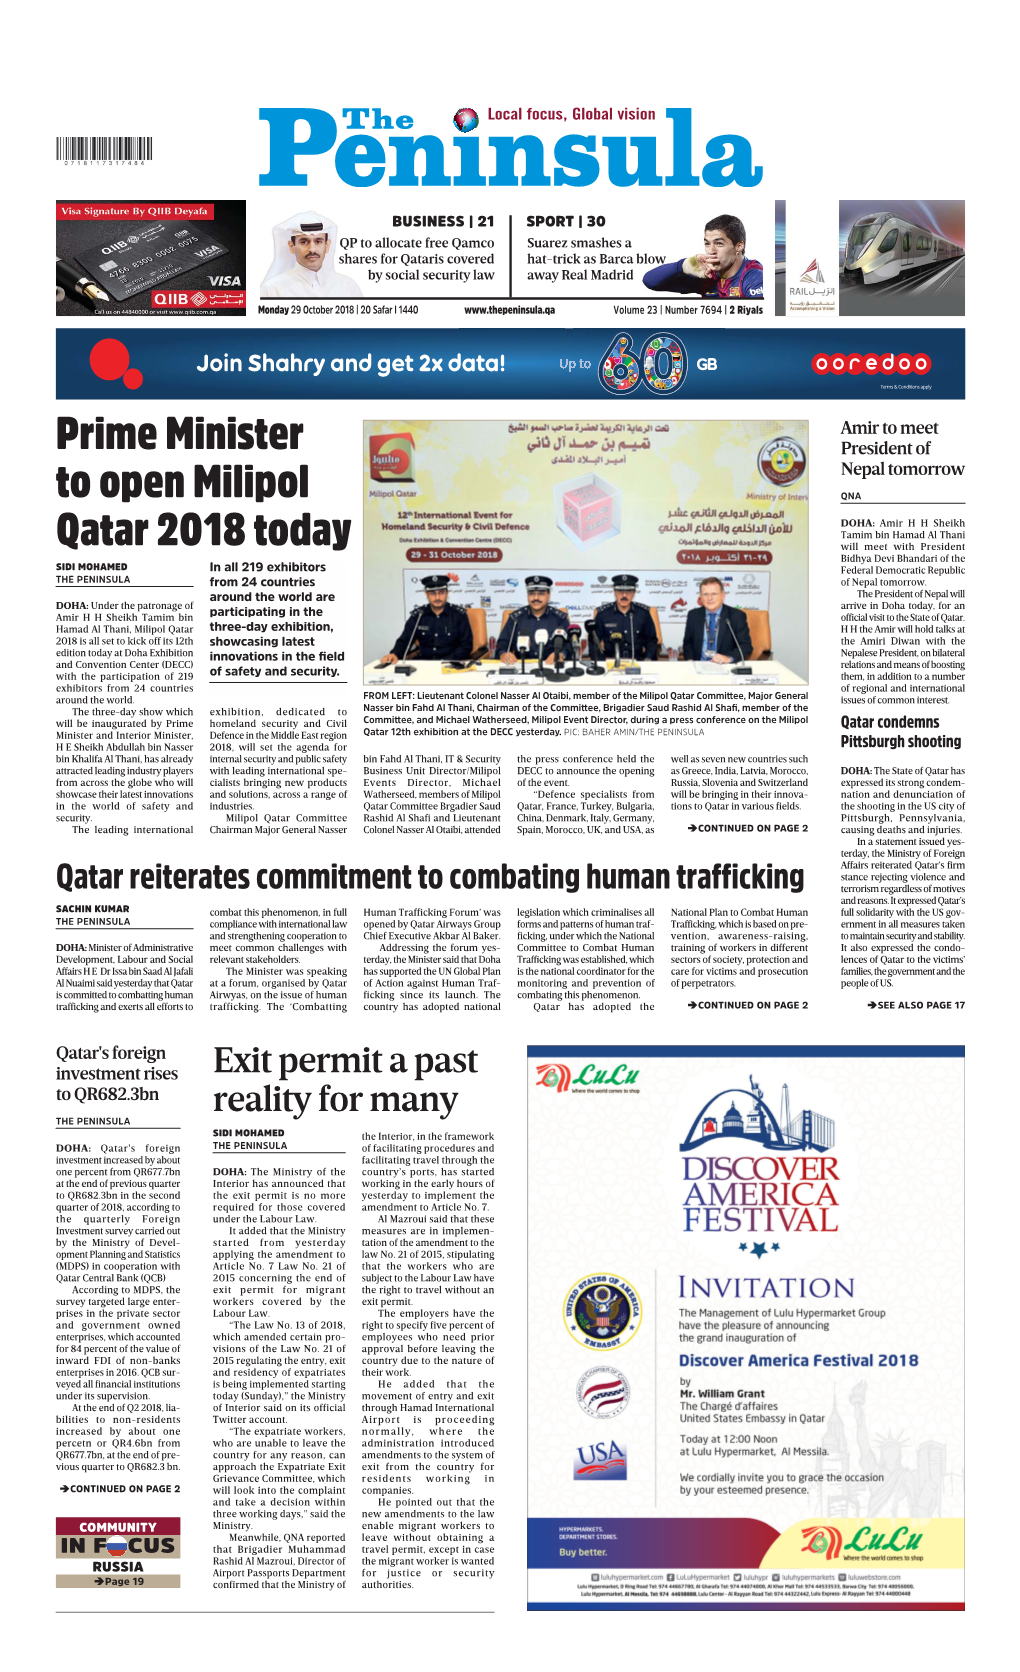 Prime Minister to Open Milipol Qatar 2018 Today